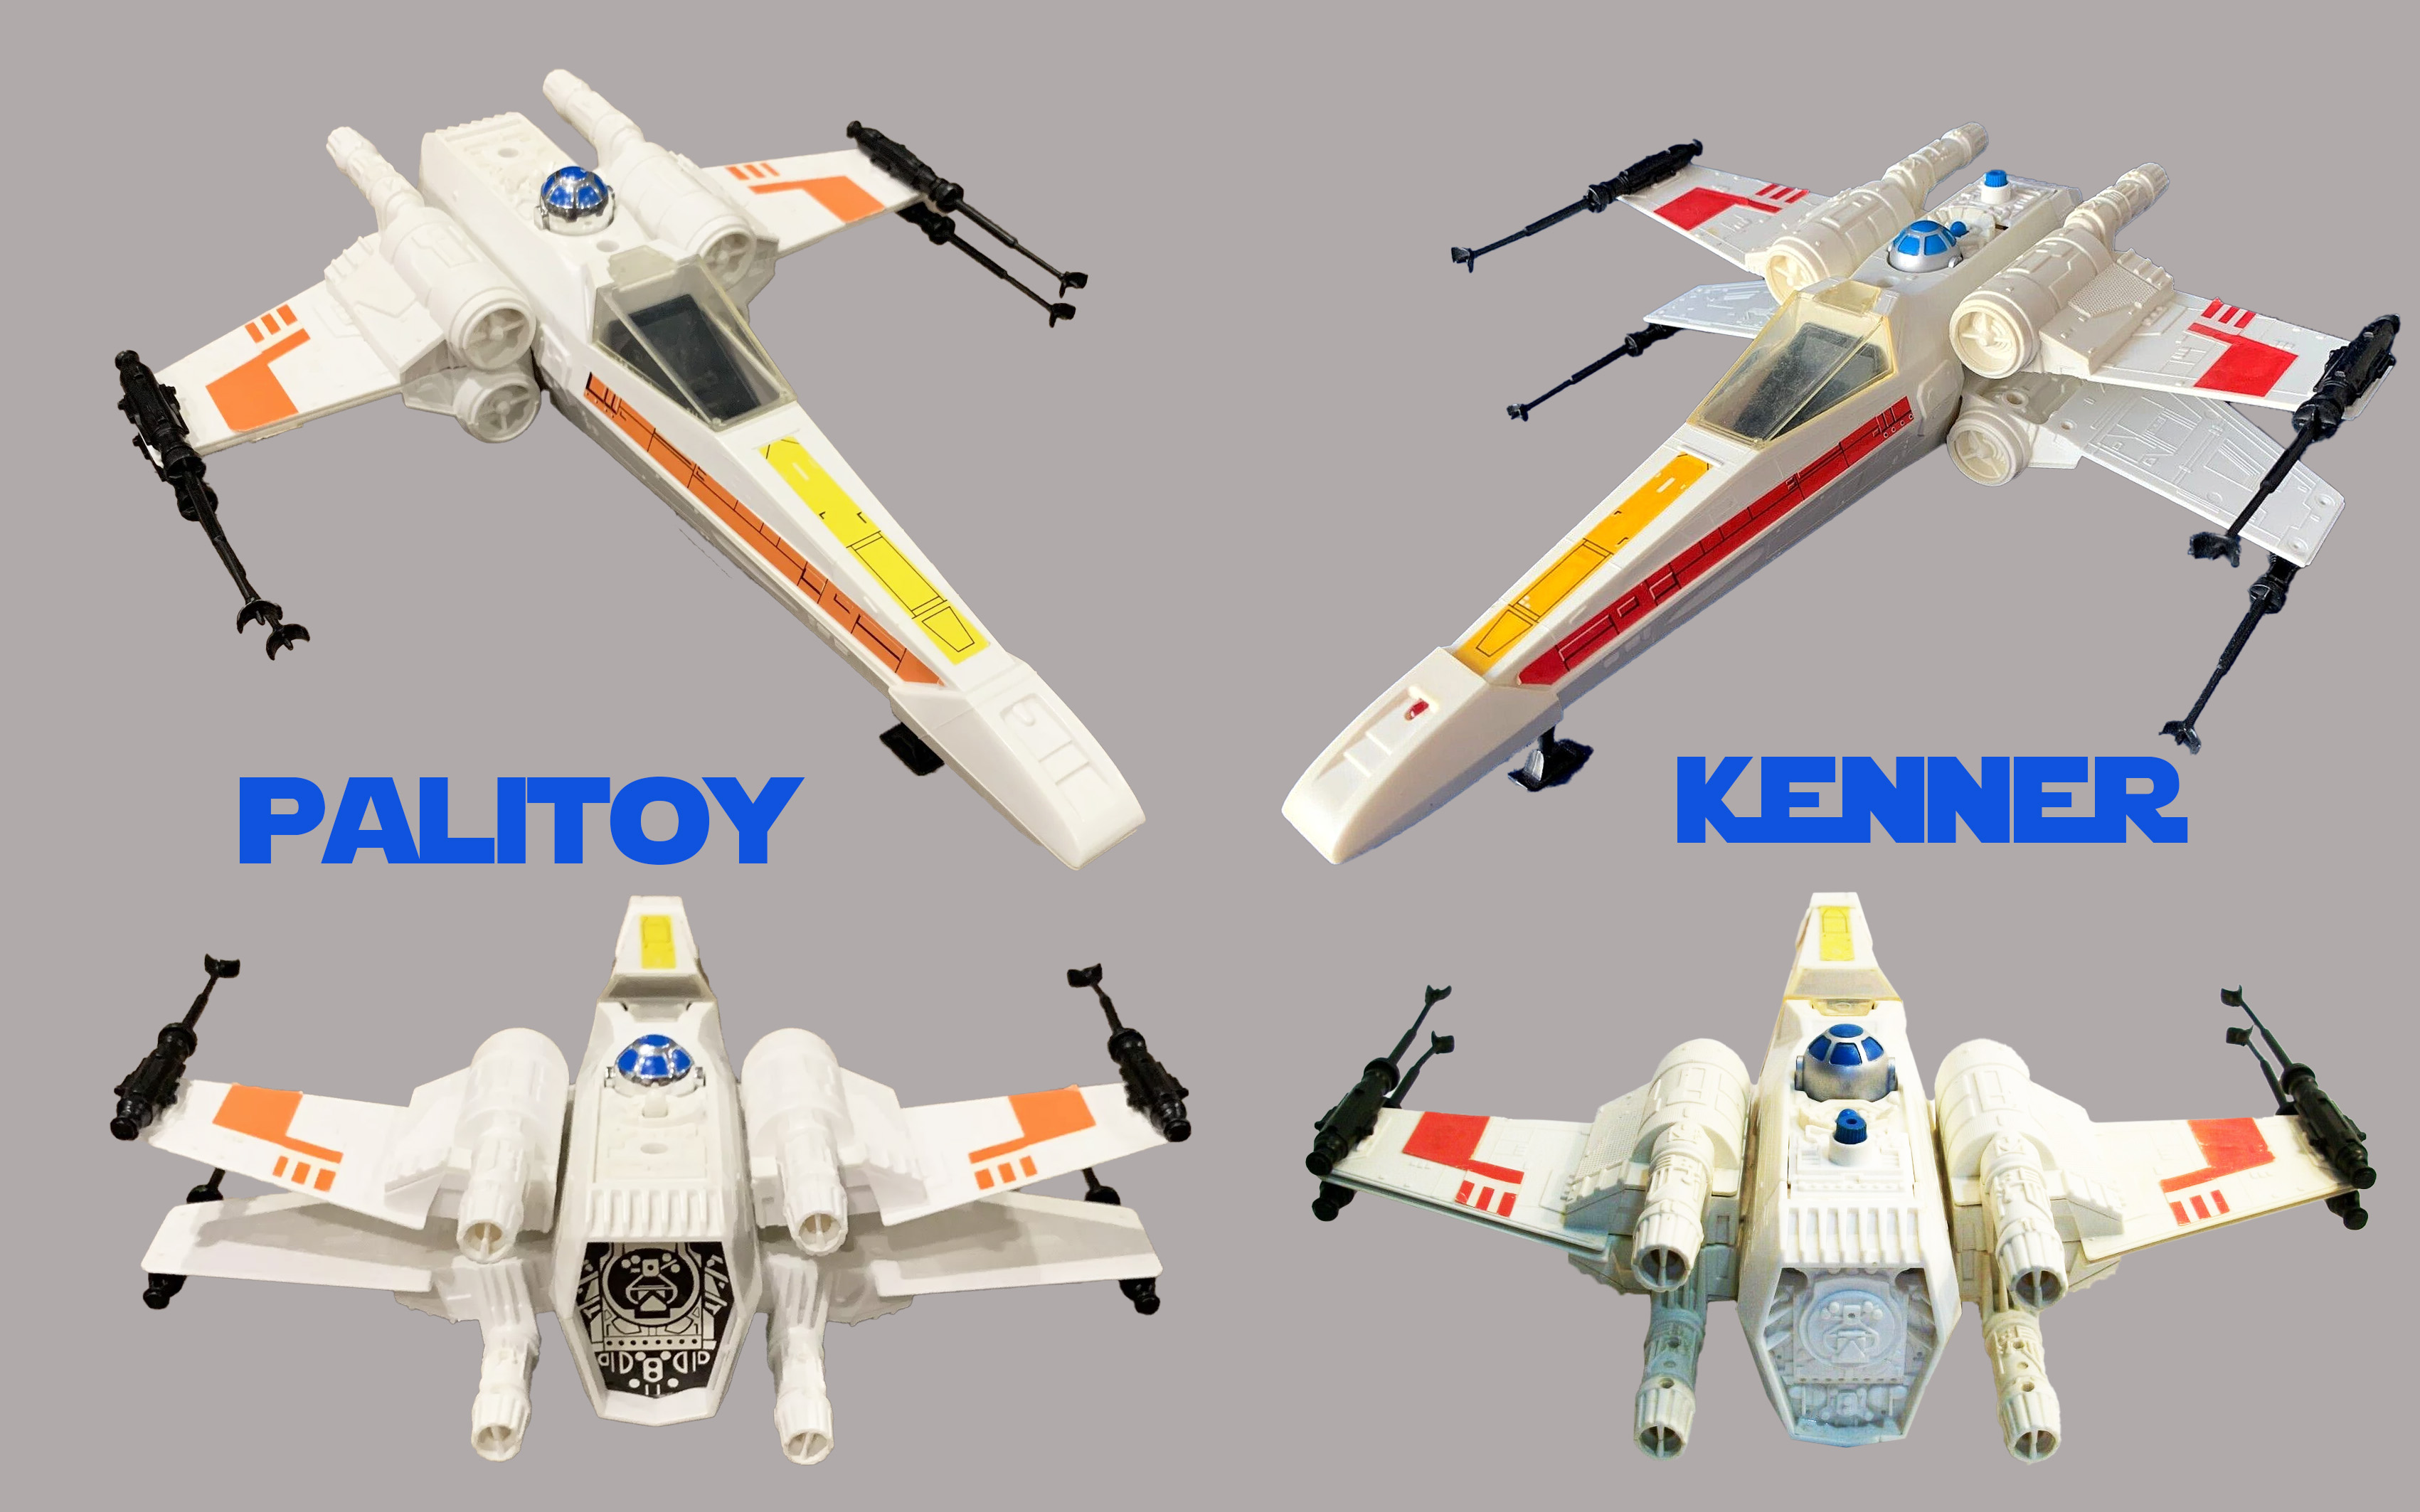 The Palitoy X-Wing differs from the US released X-Wings in a few ways, including a white button and a rear sticker.